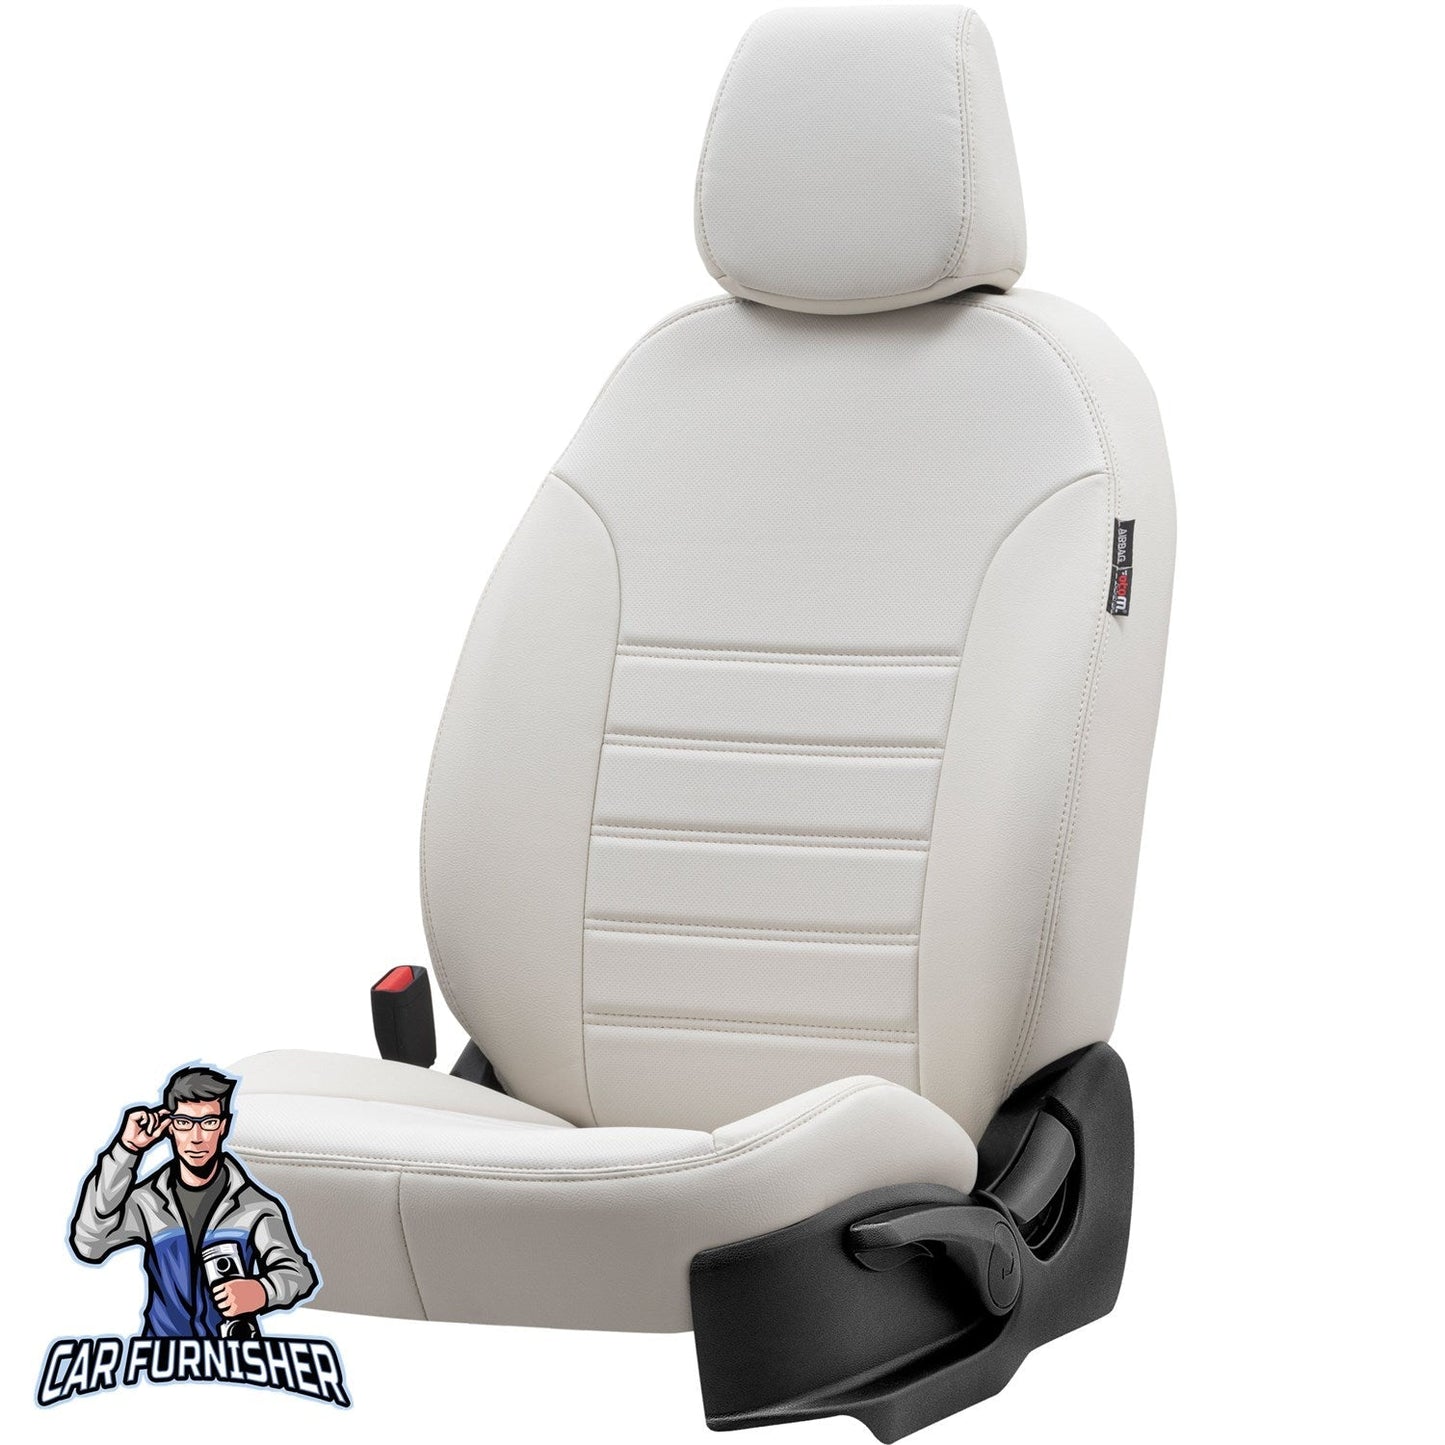 Volkswagen Caravelle Seat Cover Istanbul Leather Design Ivory Leather